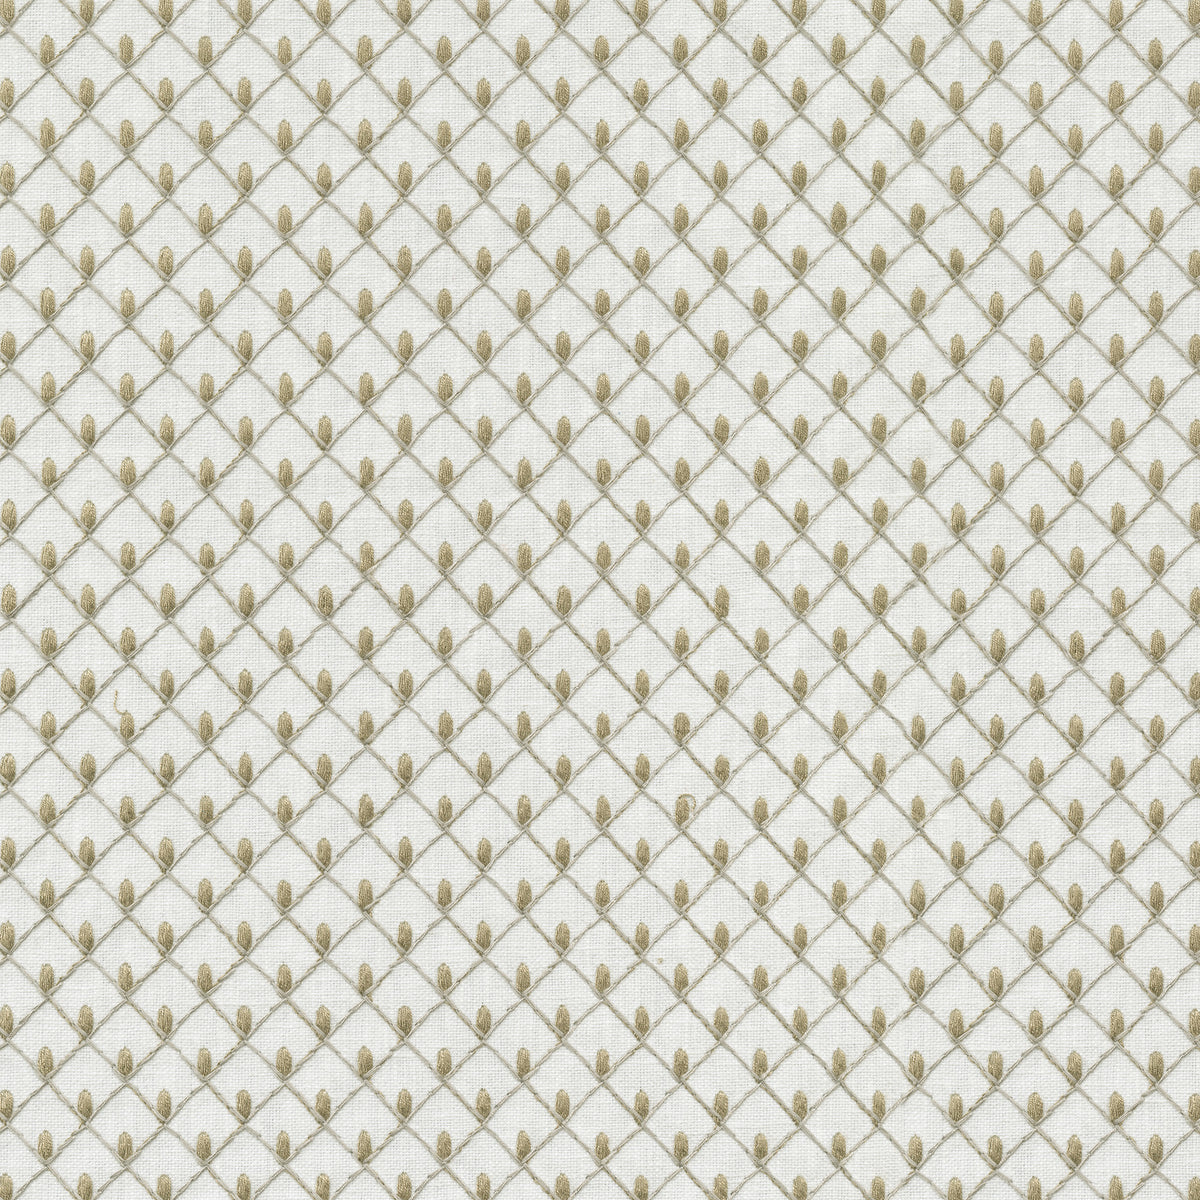 P/K Lifestyles Picot Emb - Linen 411843 Upholstery Fabric